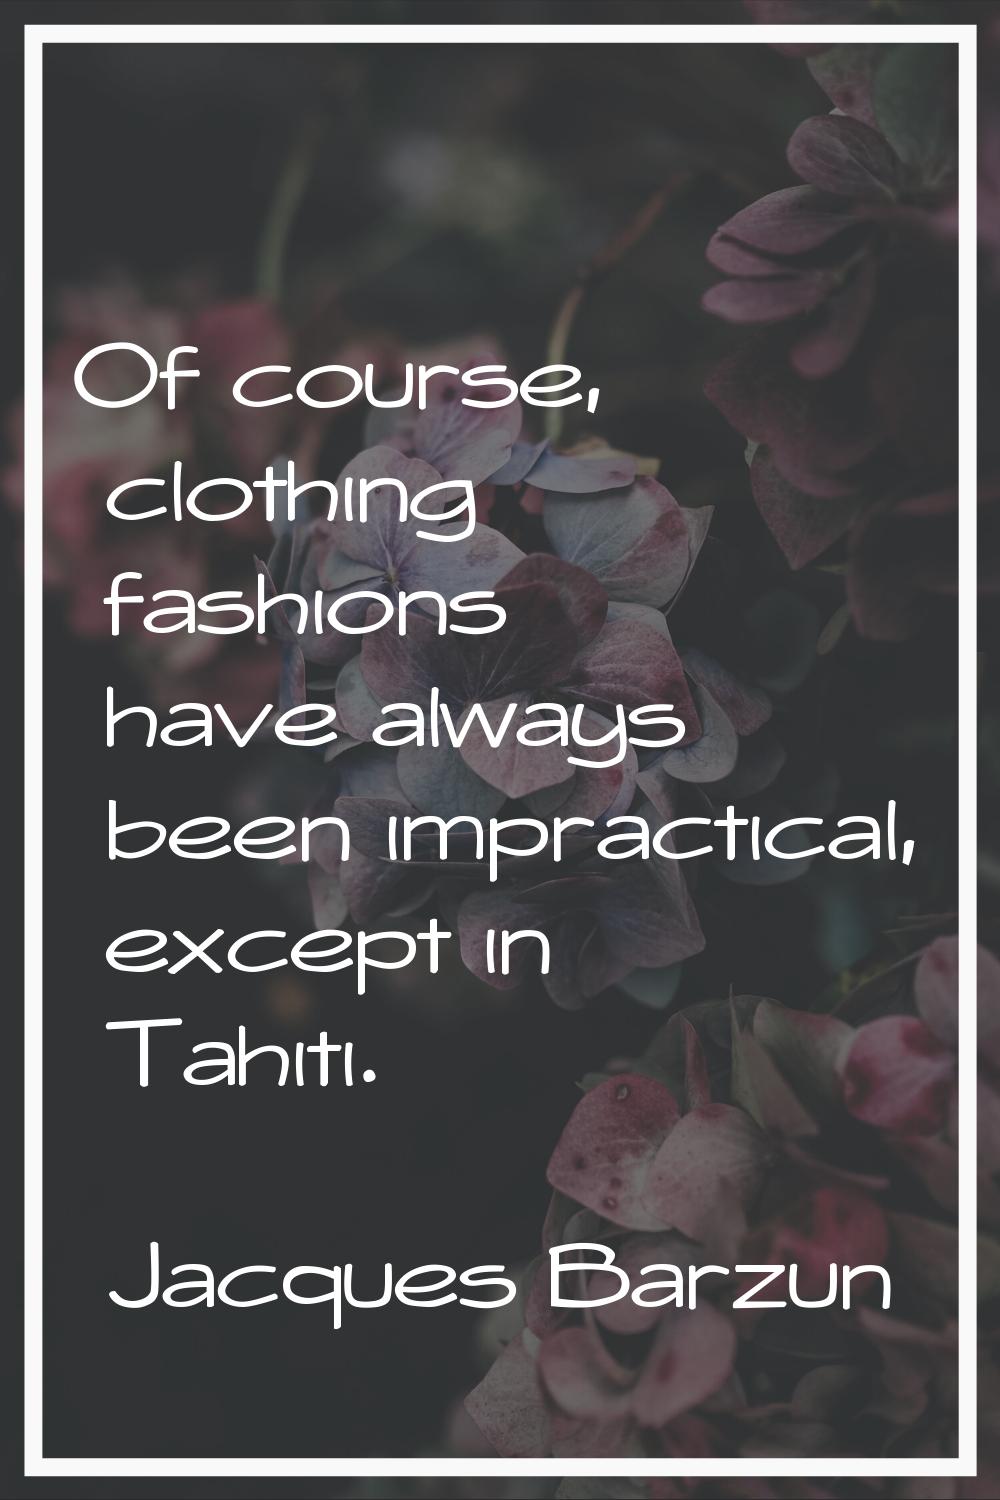 Of course, clothing fashions have always been impractical, except in Tahiti.